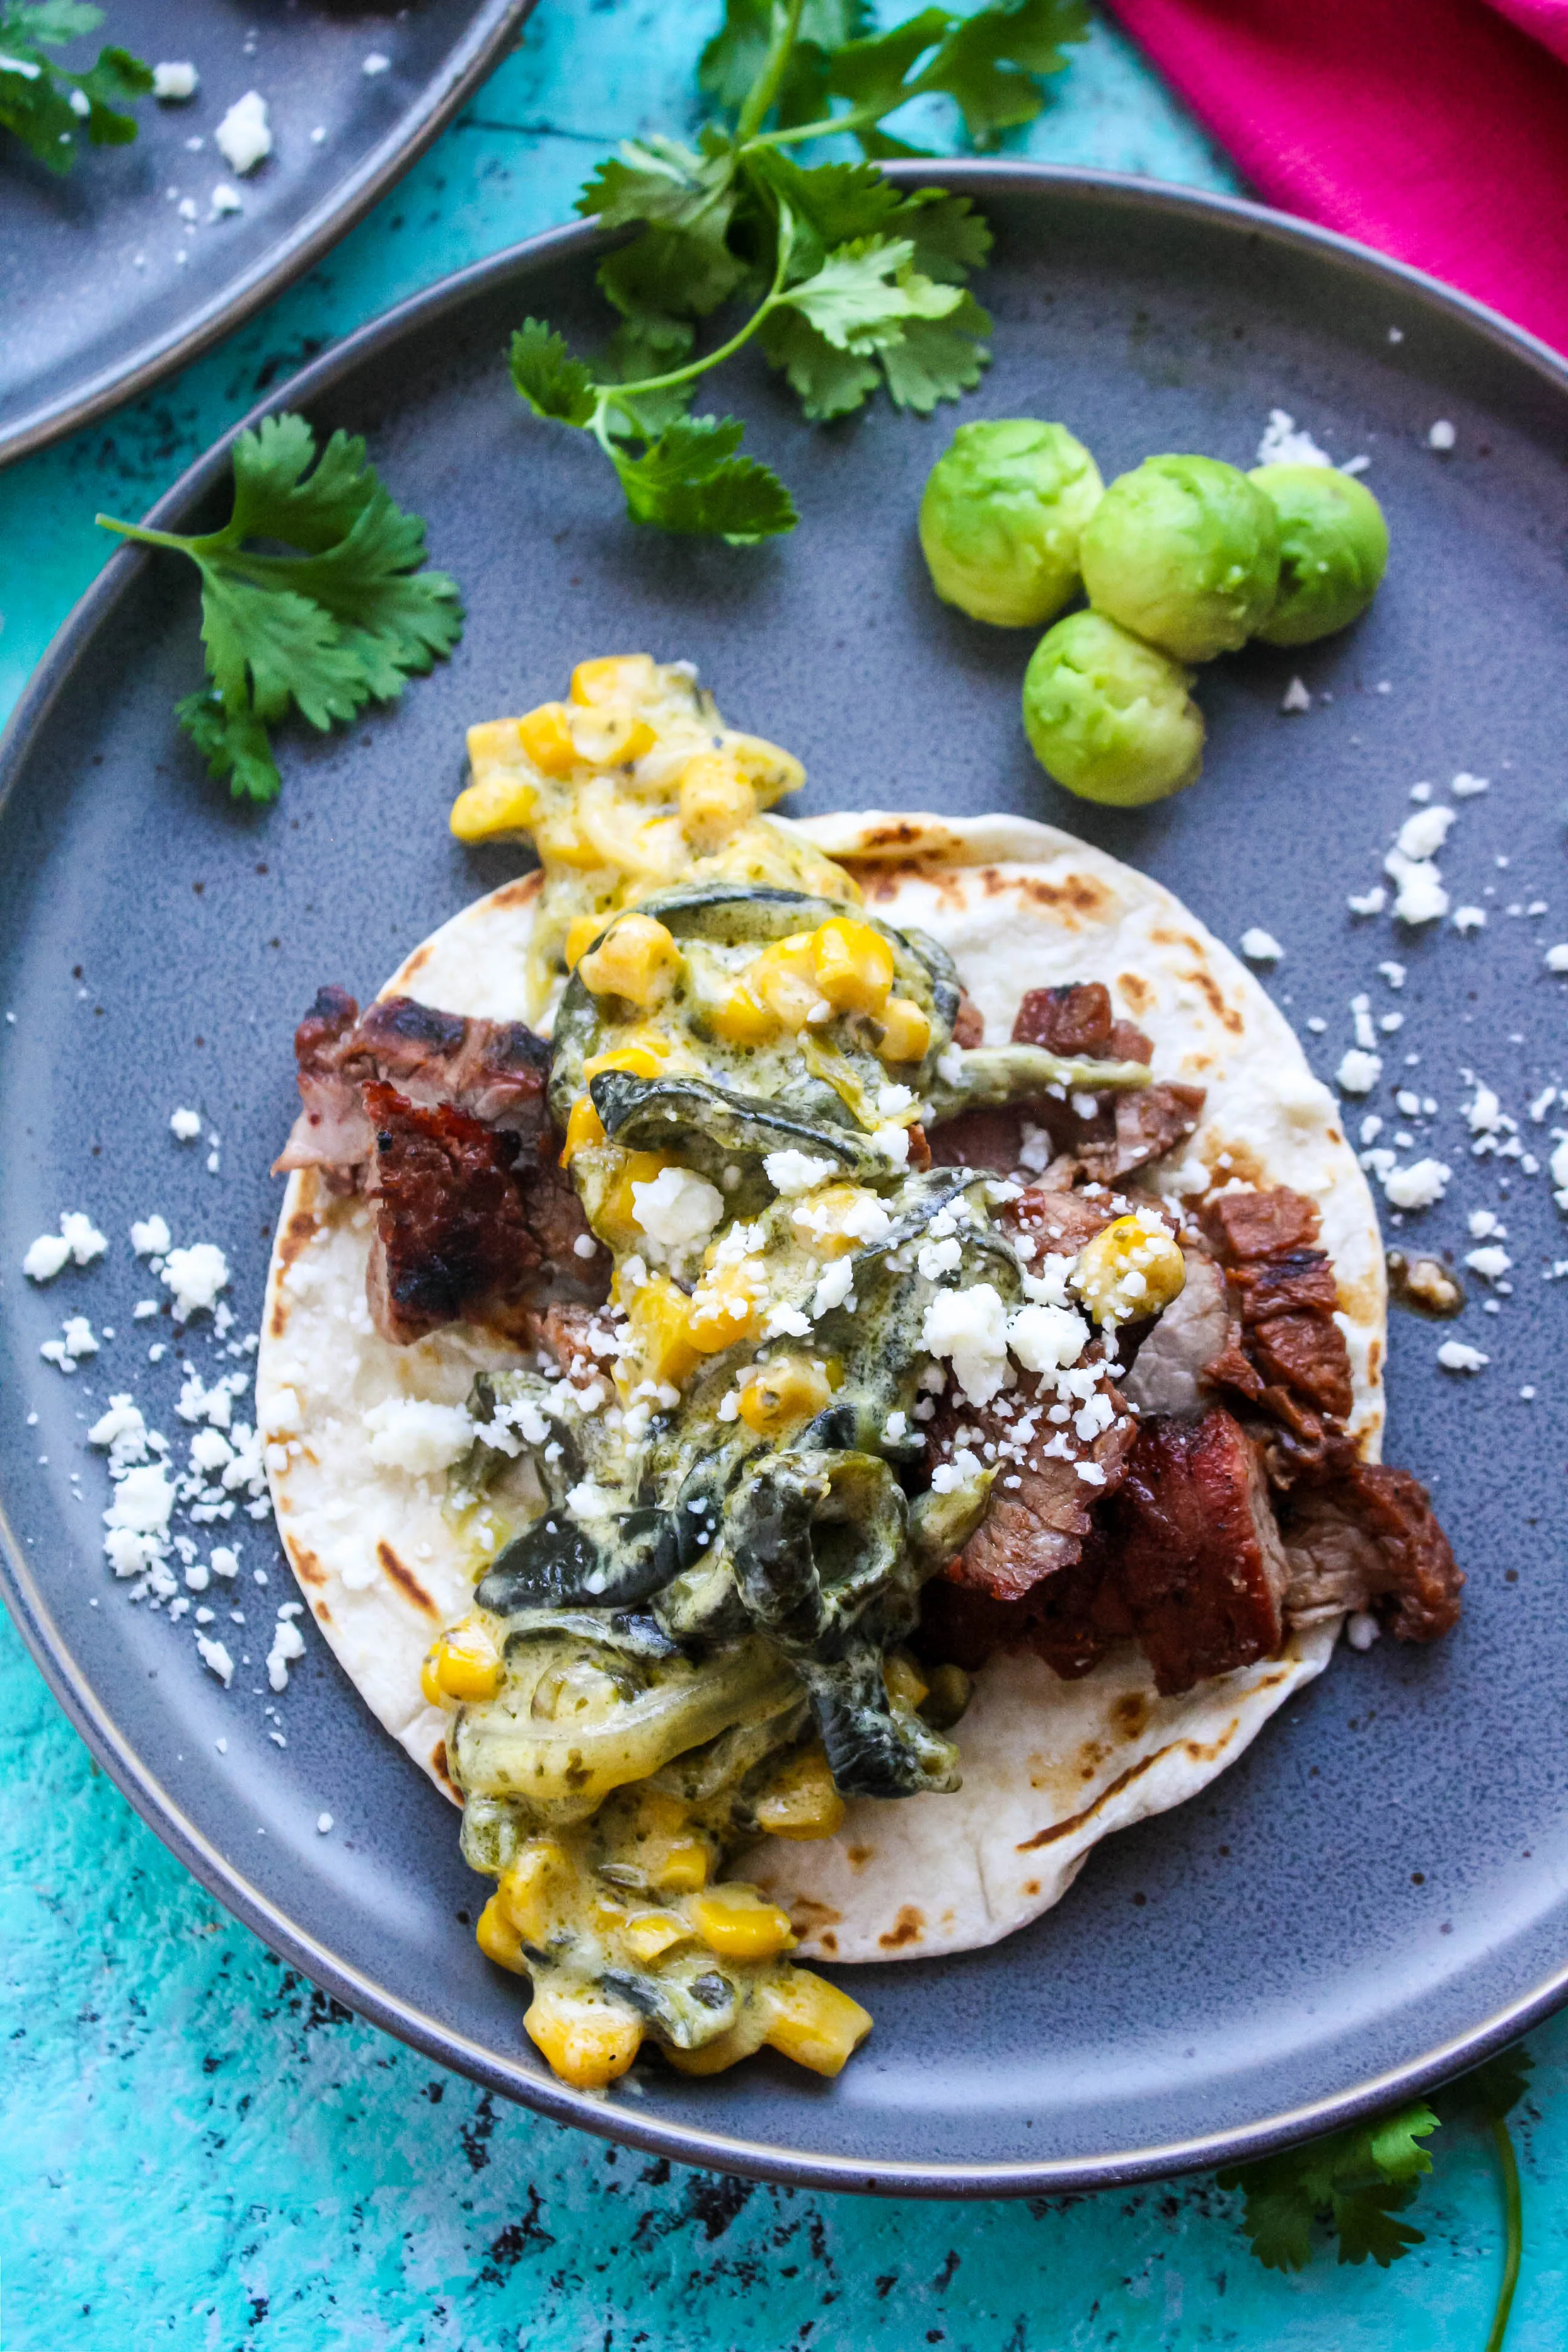 Steak Tacos with Poblano Pepper Strips and Cream Sauce (Rajas con Crema) is a great taco-night option! You'll love these Steak Tacos with Poblano Pepper Strips and Cream Sauce (Rajas con Crema)!